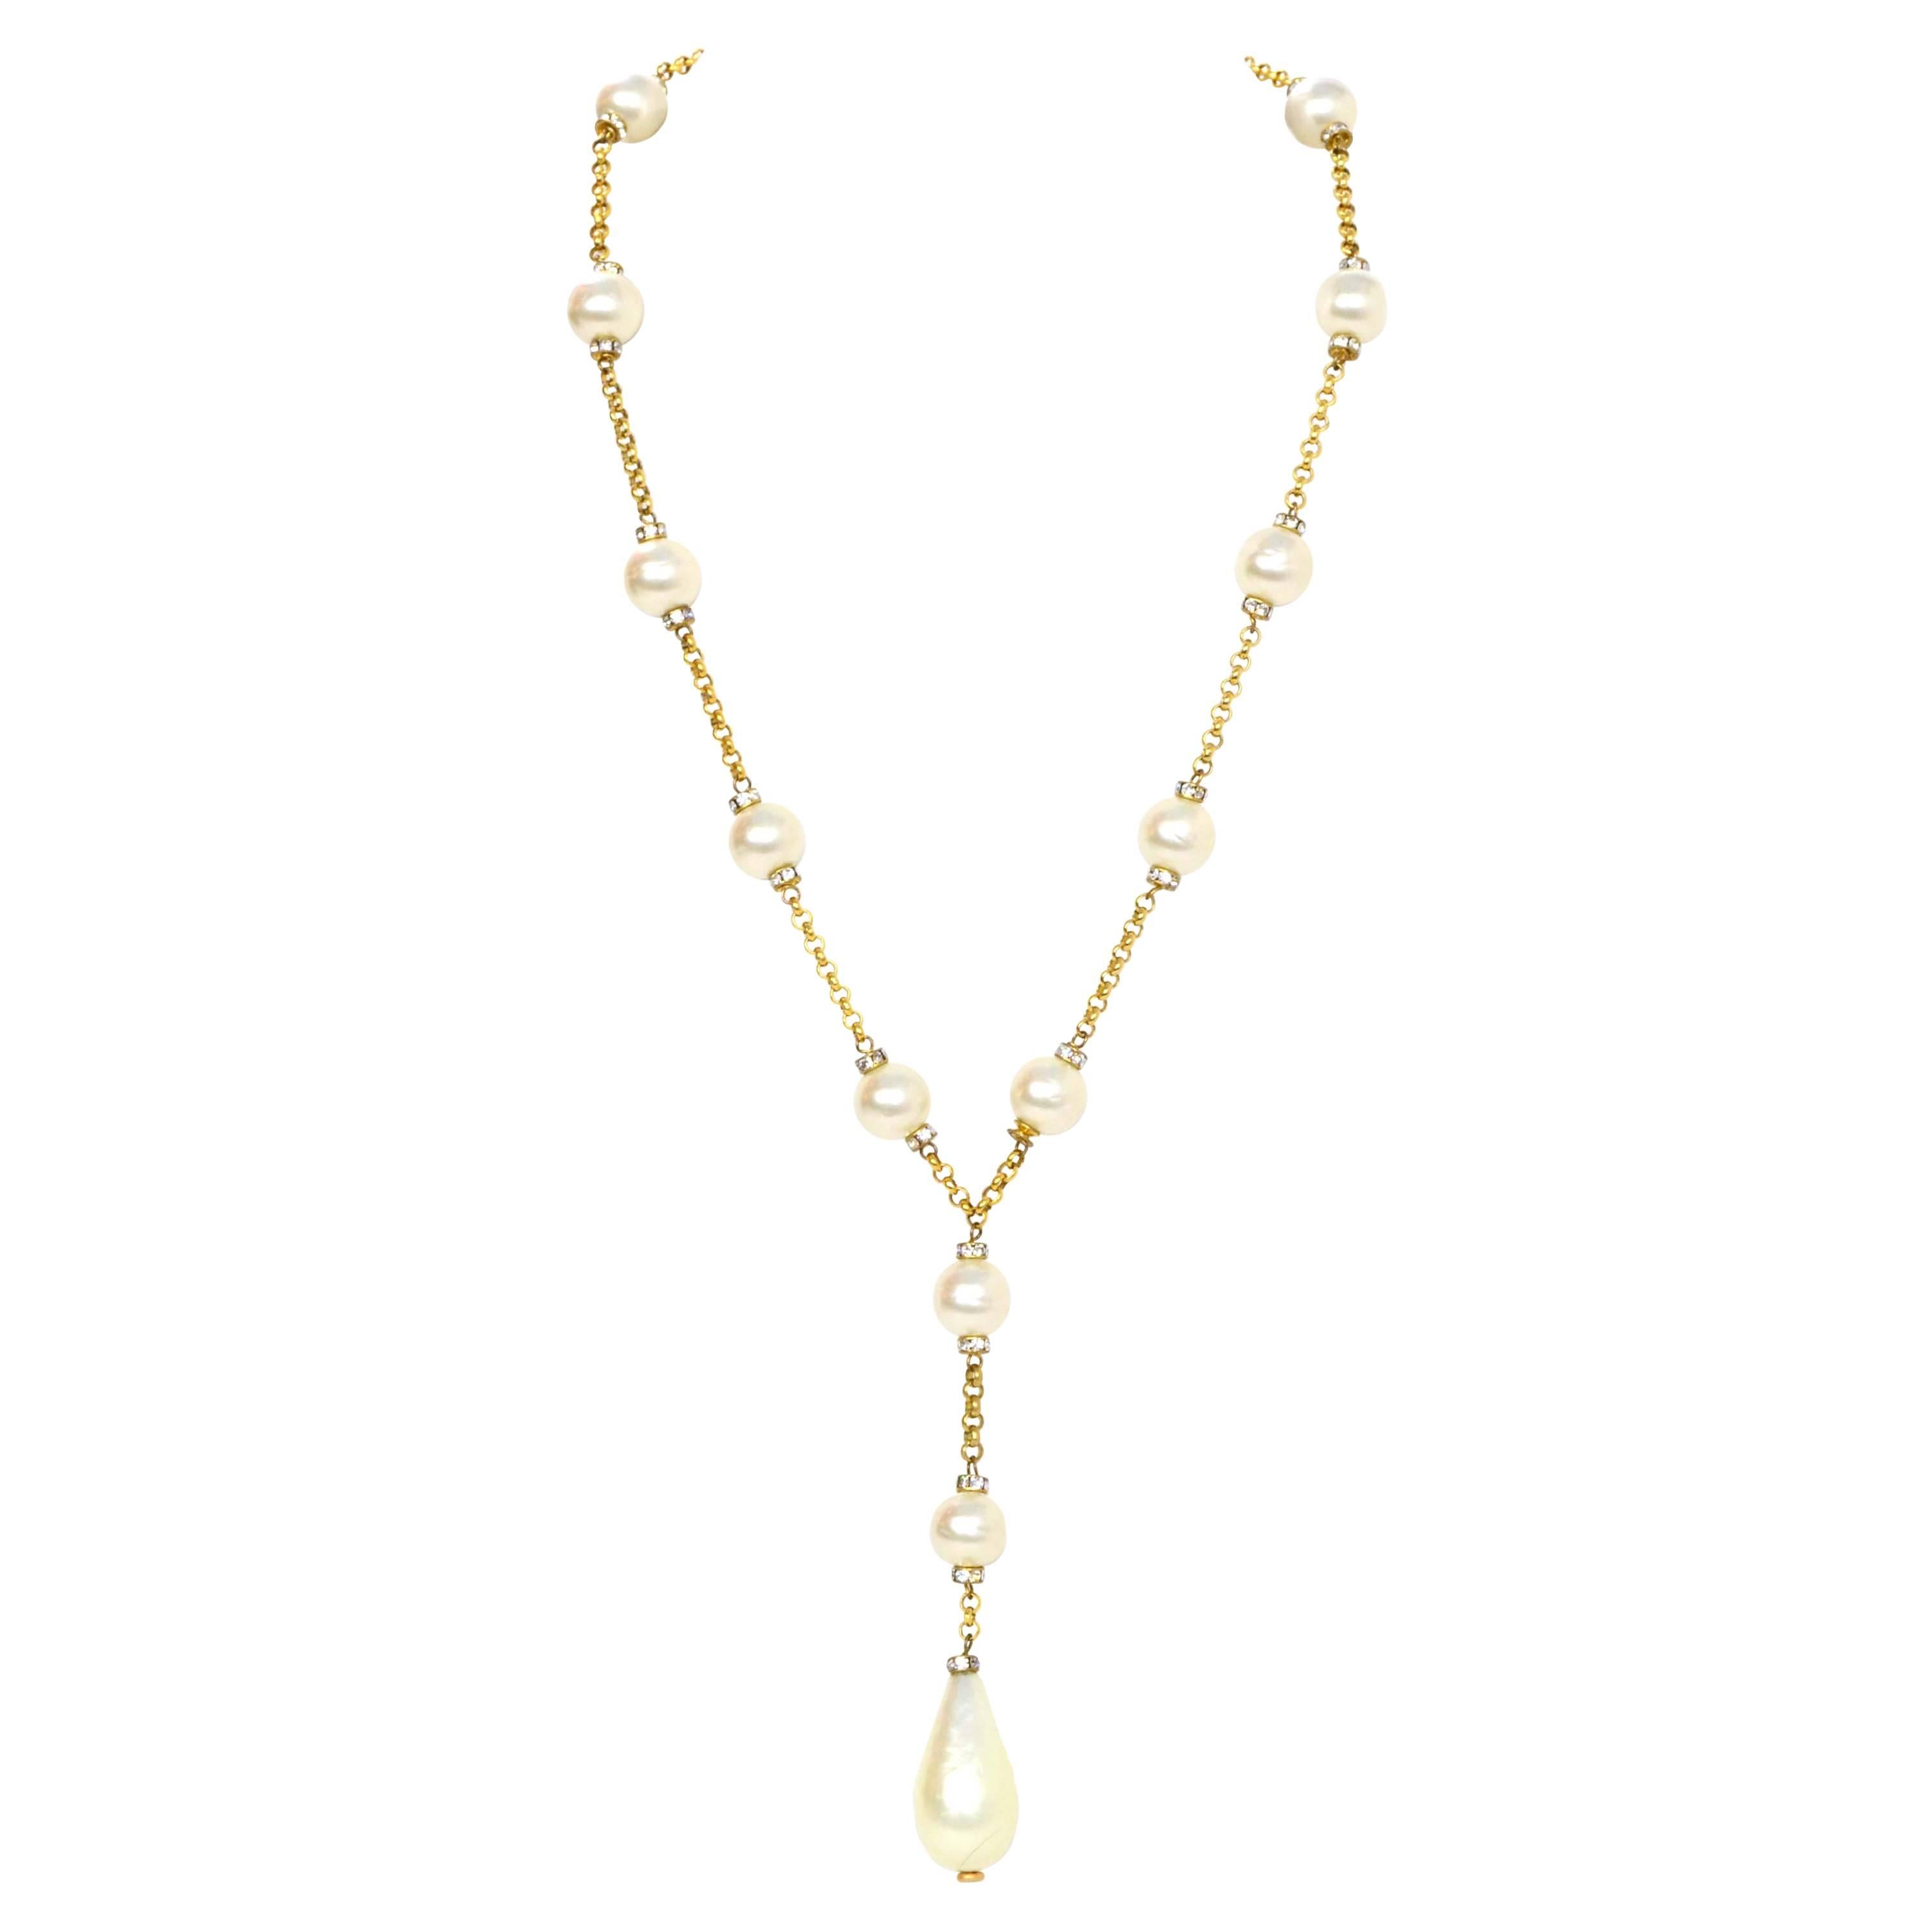 Roaring 20s Crystals, pearls and tassel lariat - Nyet Jewelry